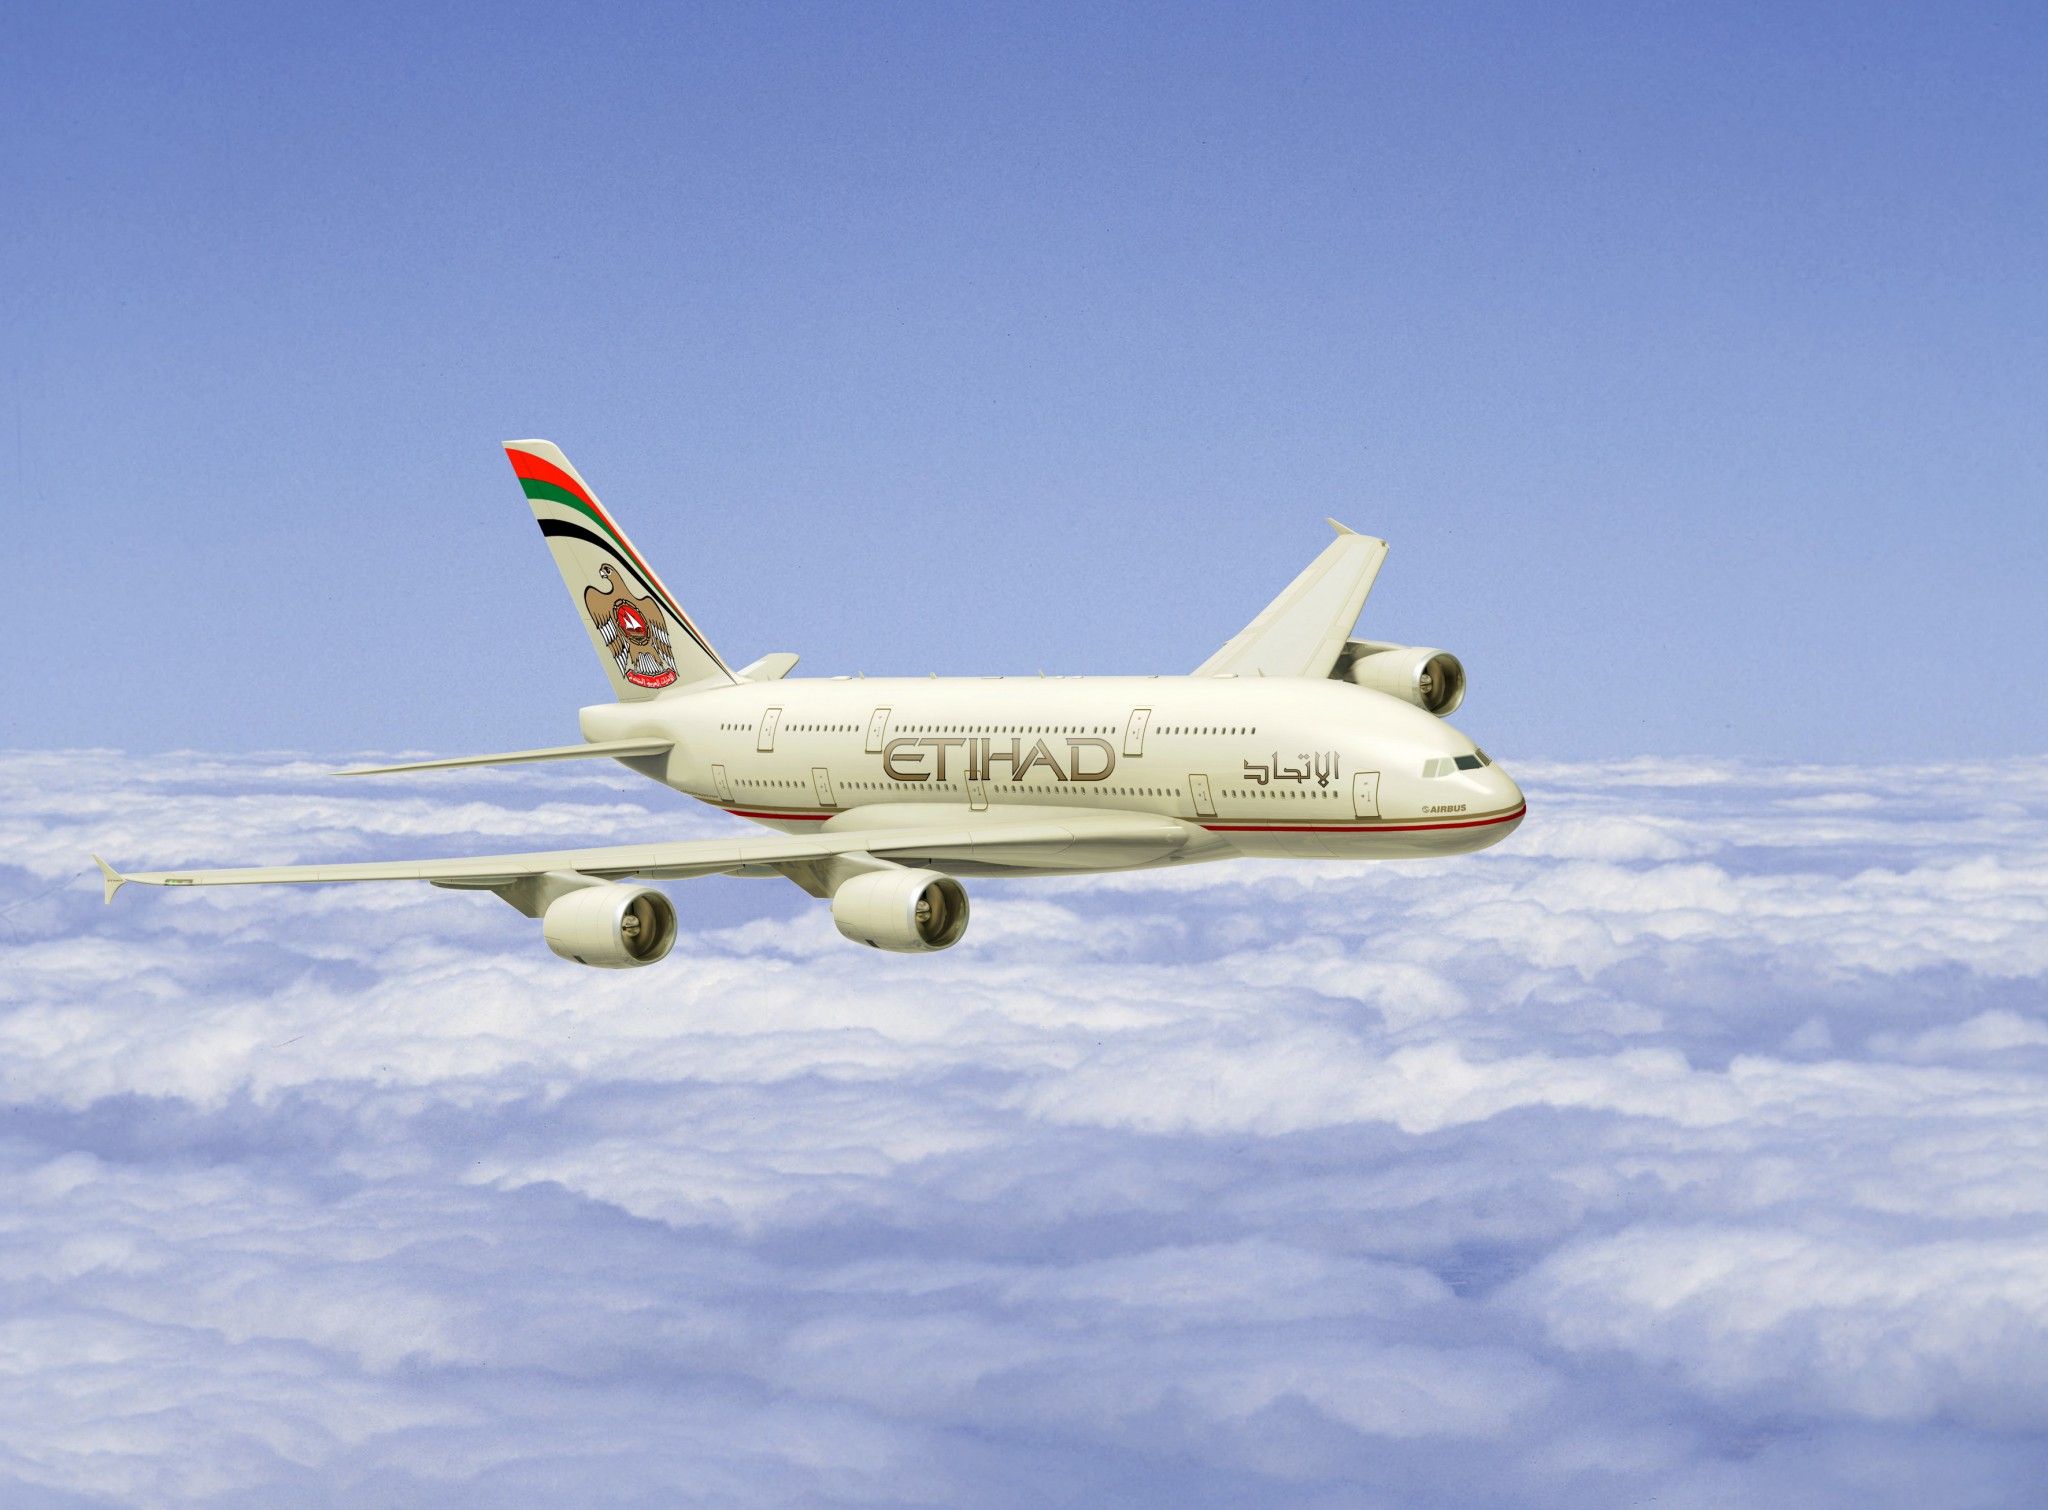 Etihad Airways welcomes its first A380 from storage